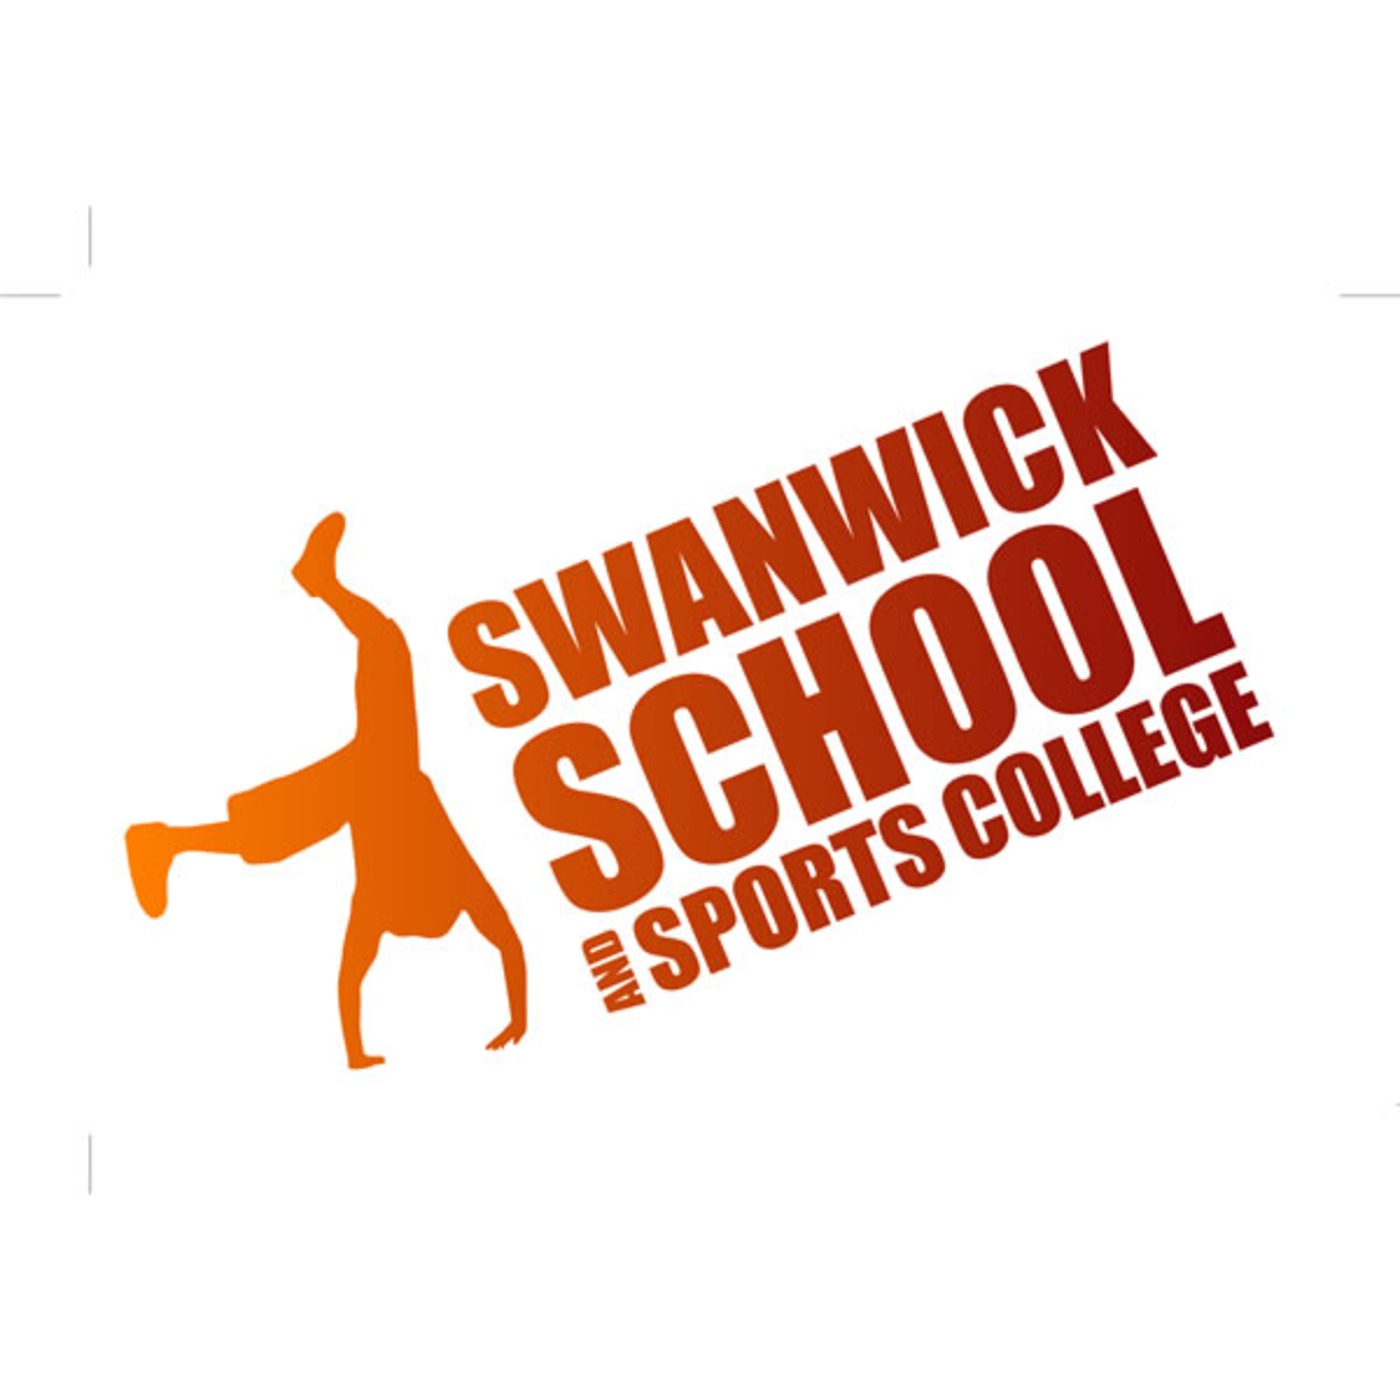 Swanwick School and Sports College Podcast